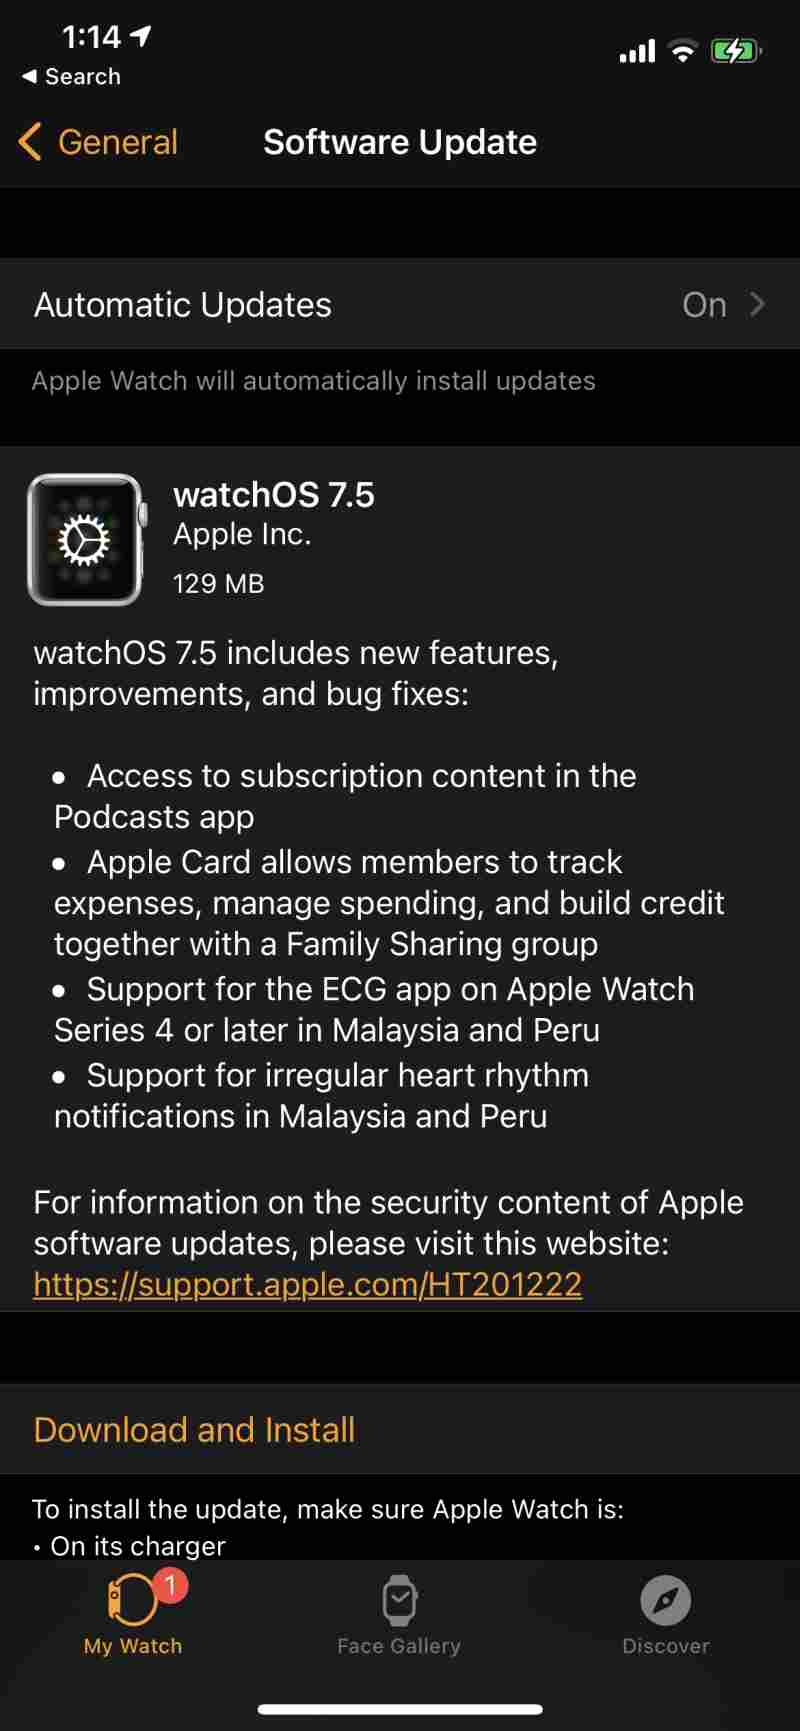 Apple Watch ECG feature will be enabled for Malaysia with watchOS 7.5 update